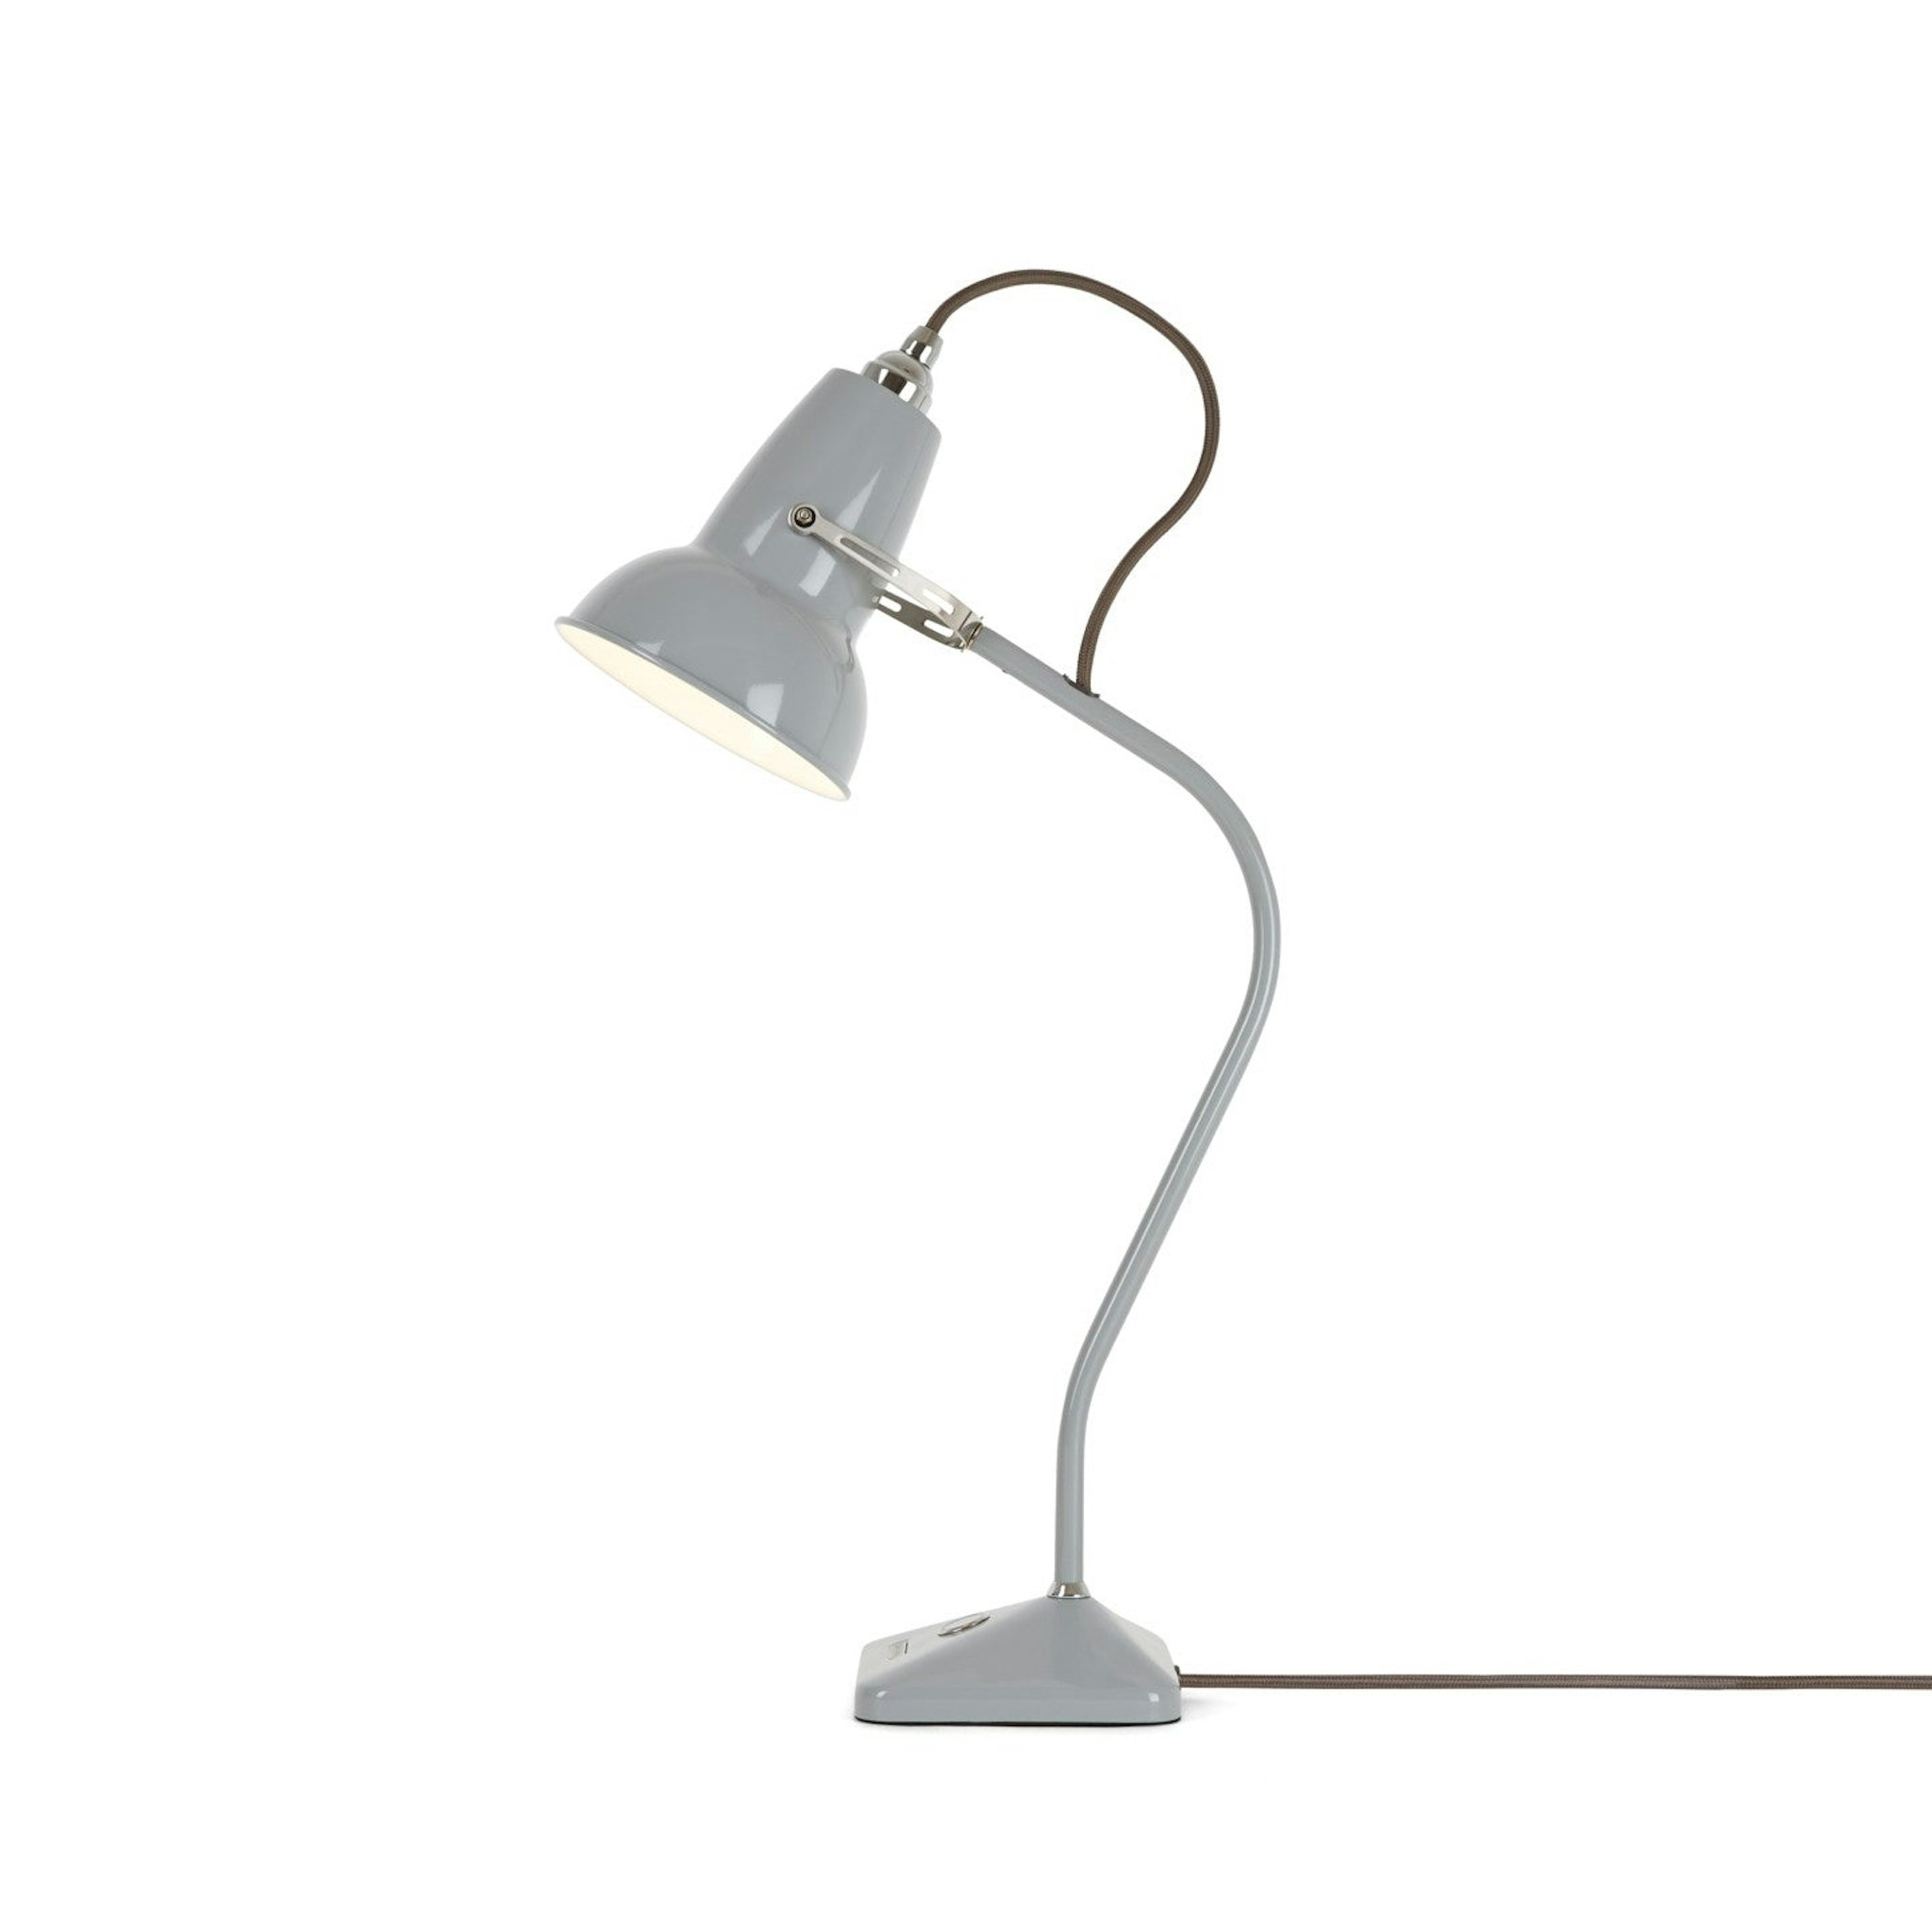 Original 1227 Mini Table Lamp by Anglepoise